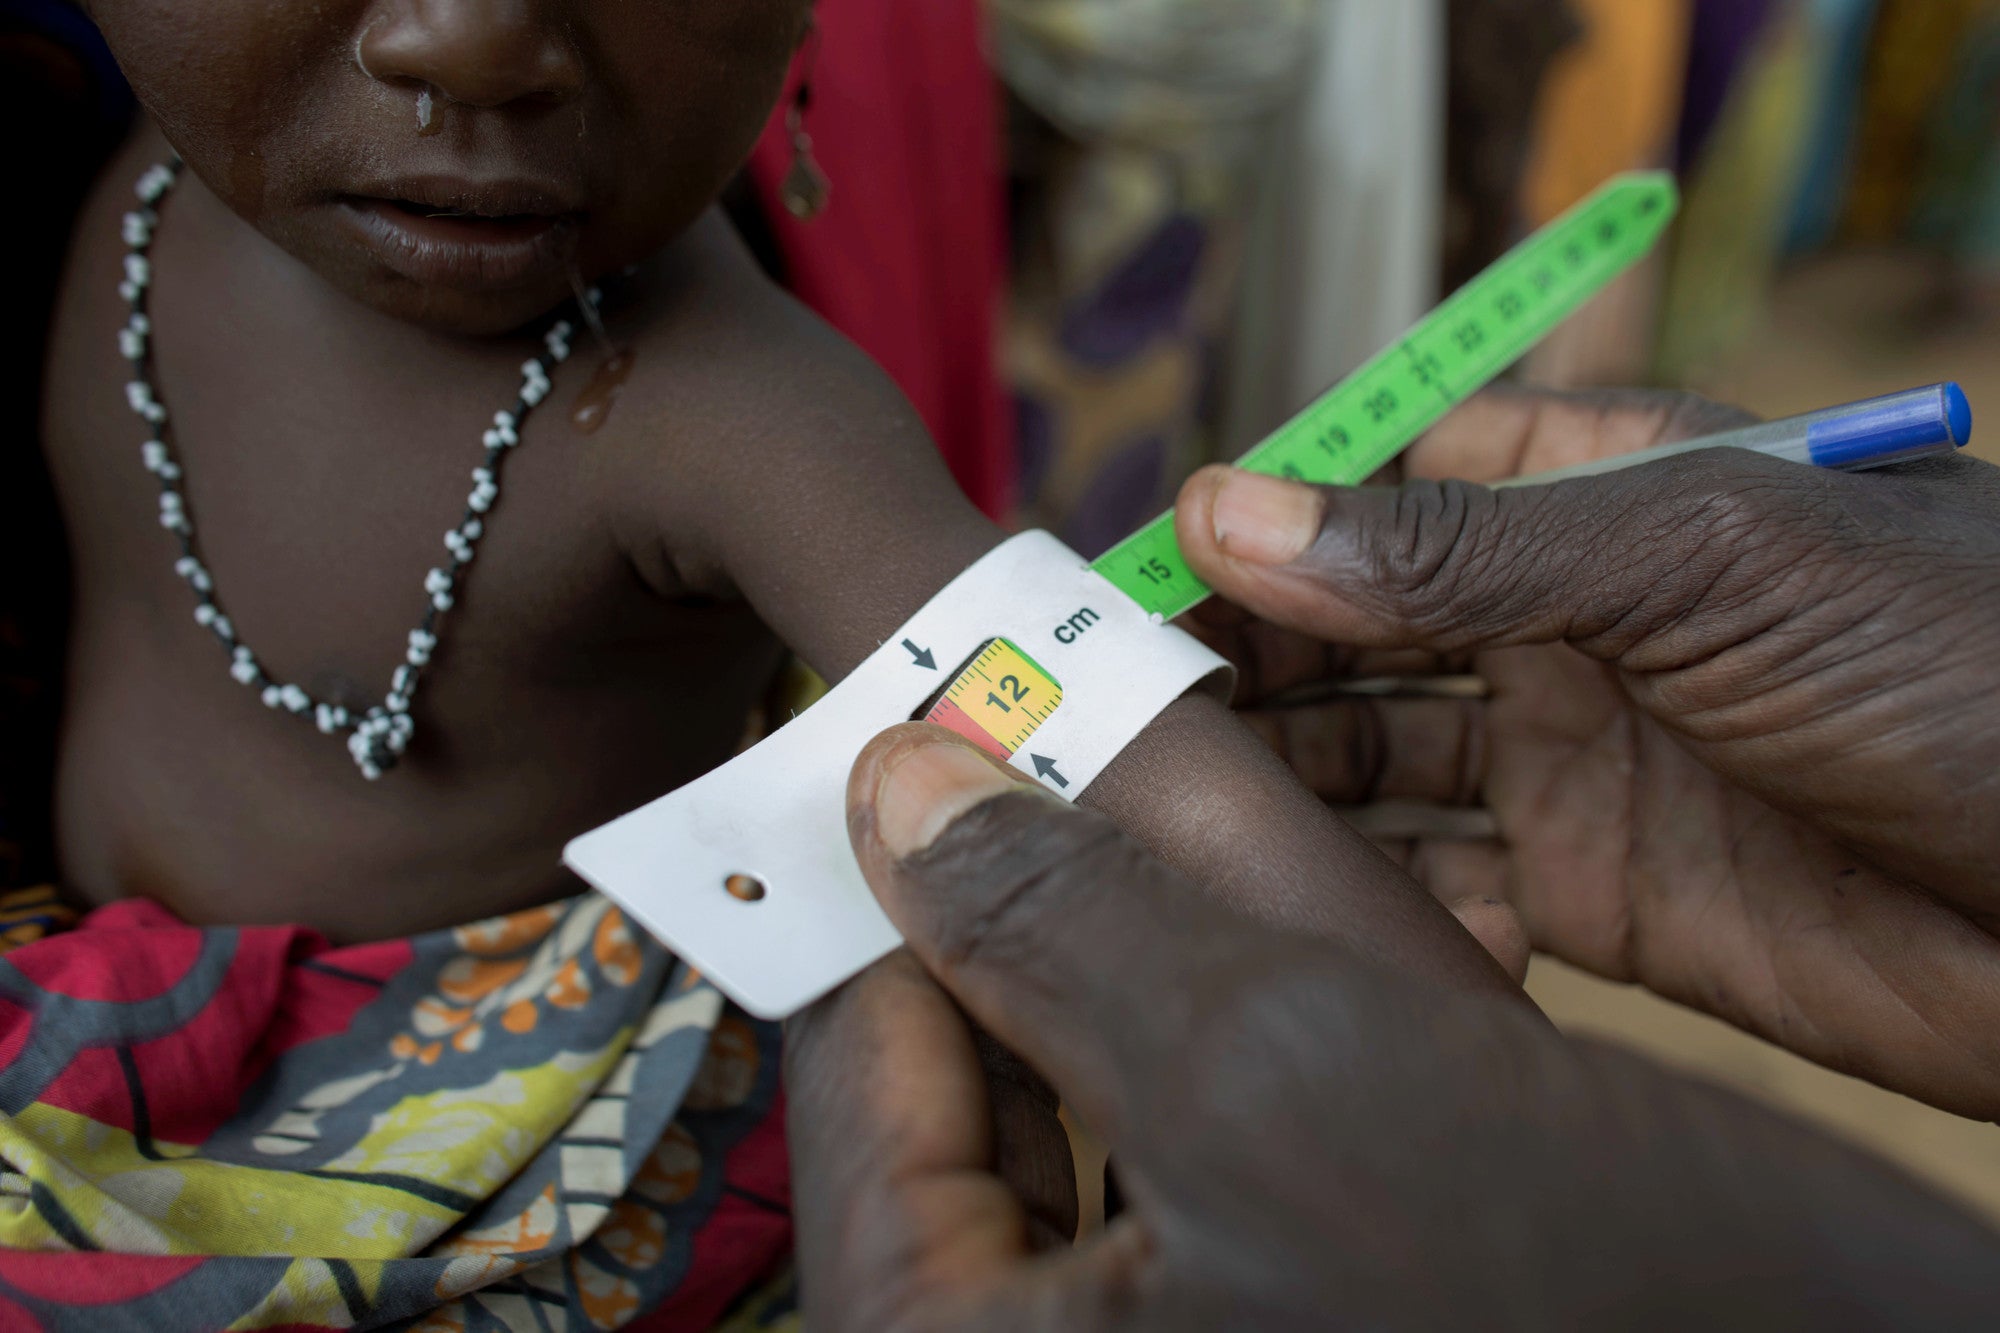 Detail of a arm band used to measure child malnutrition